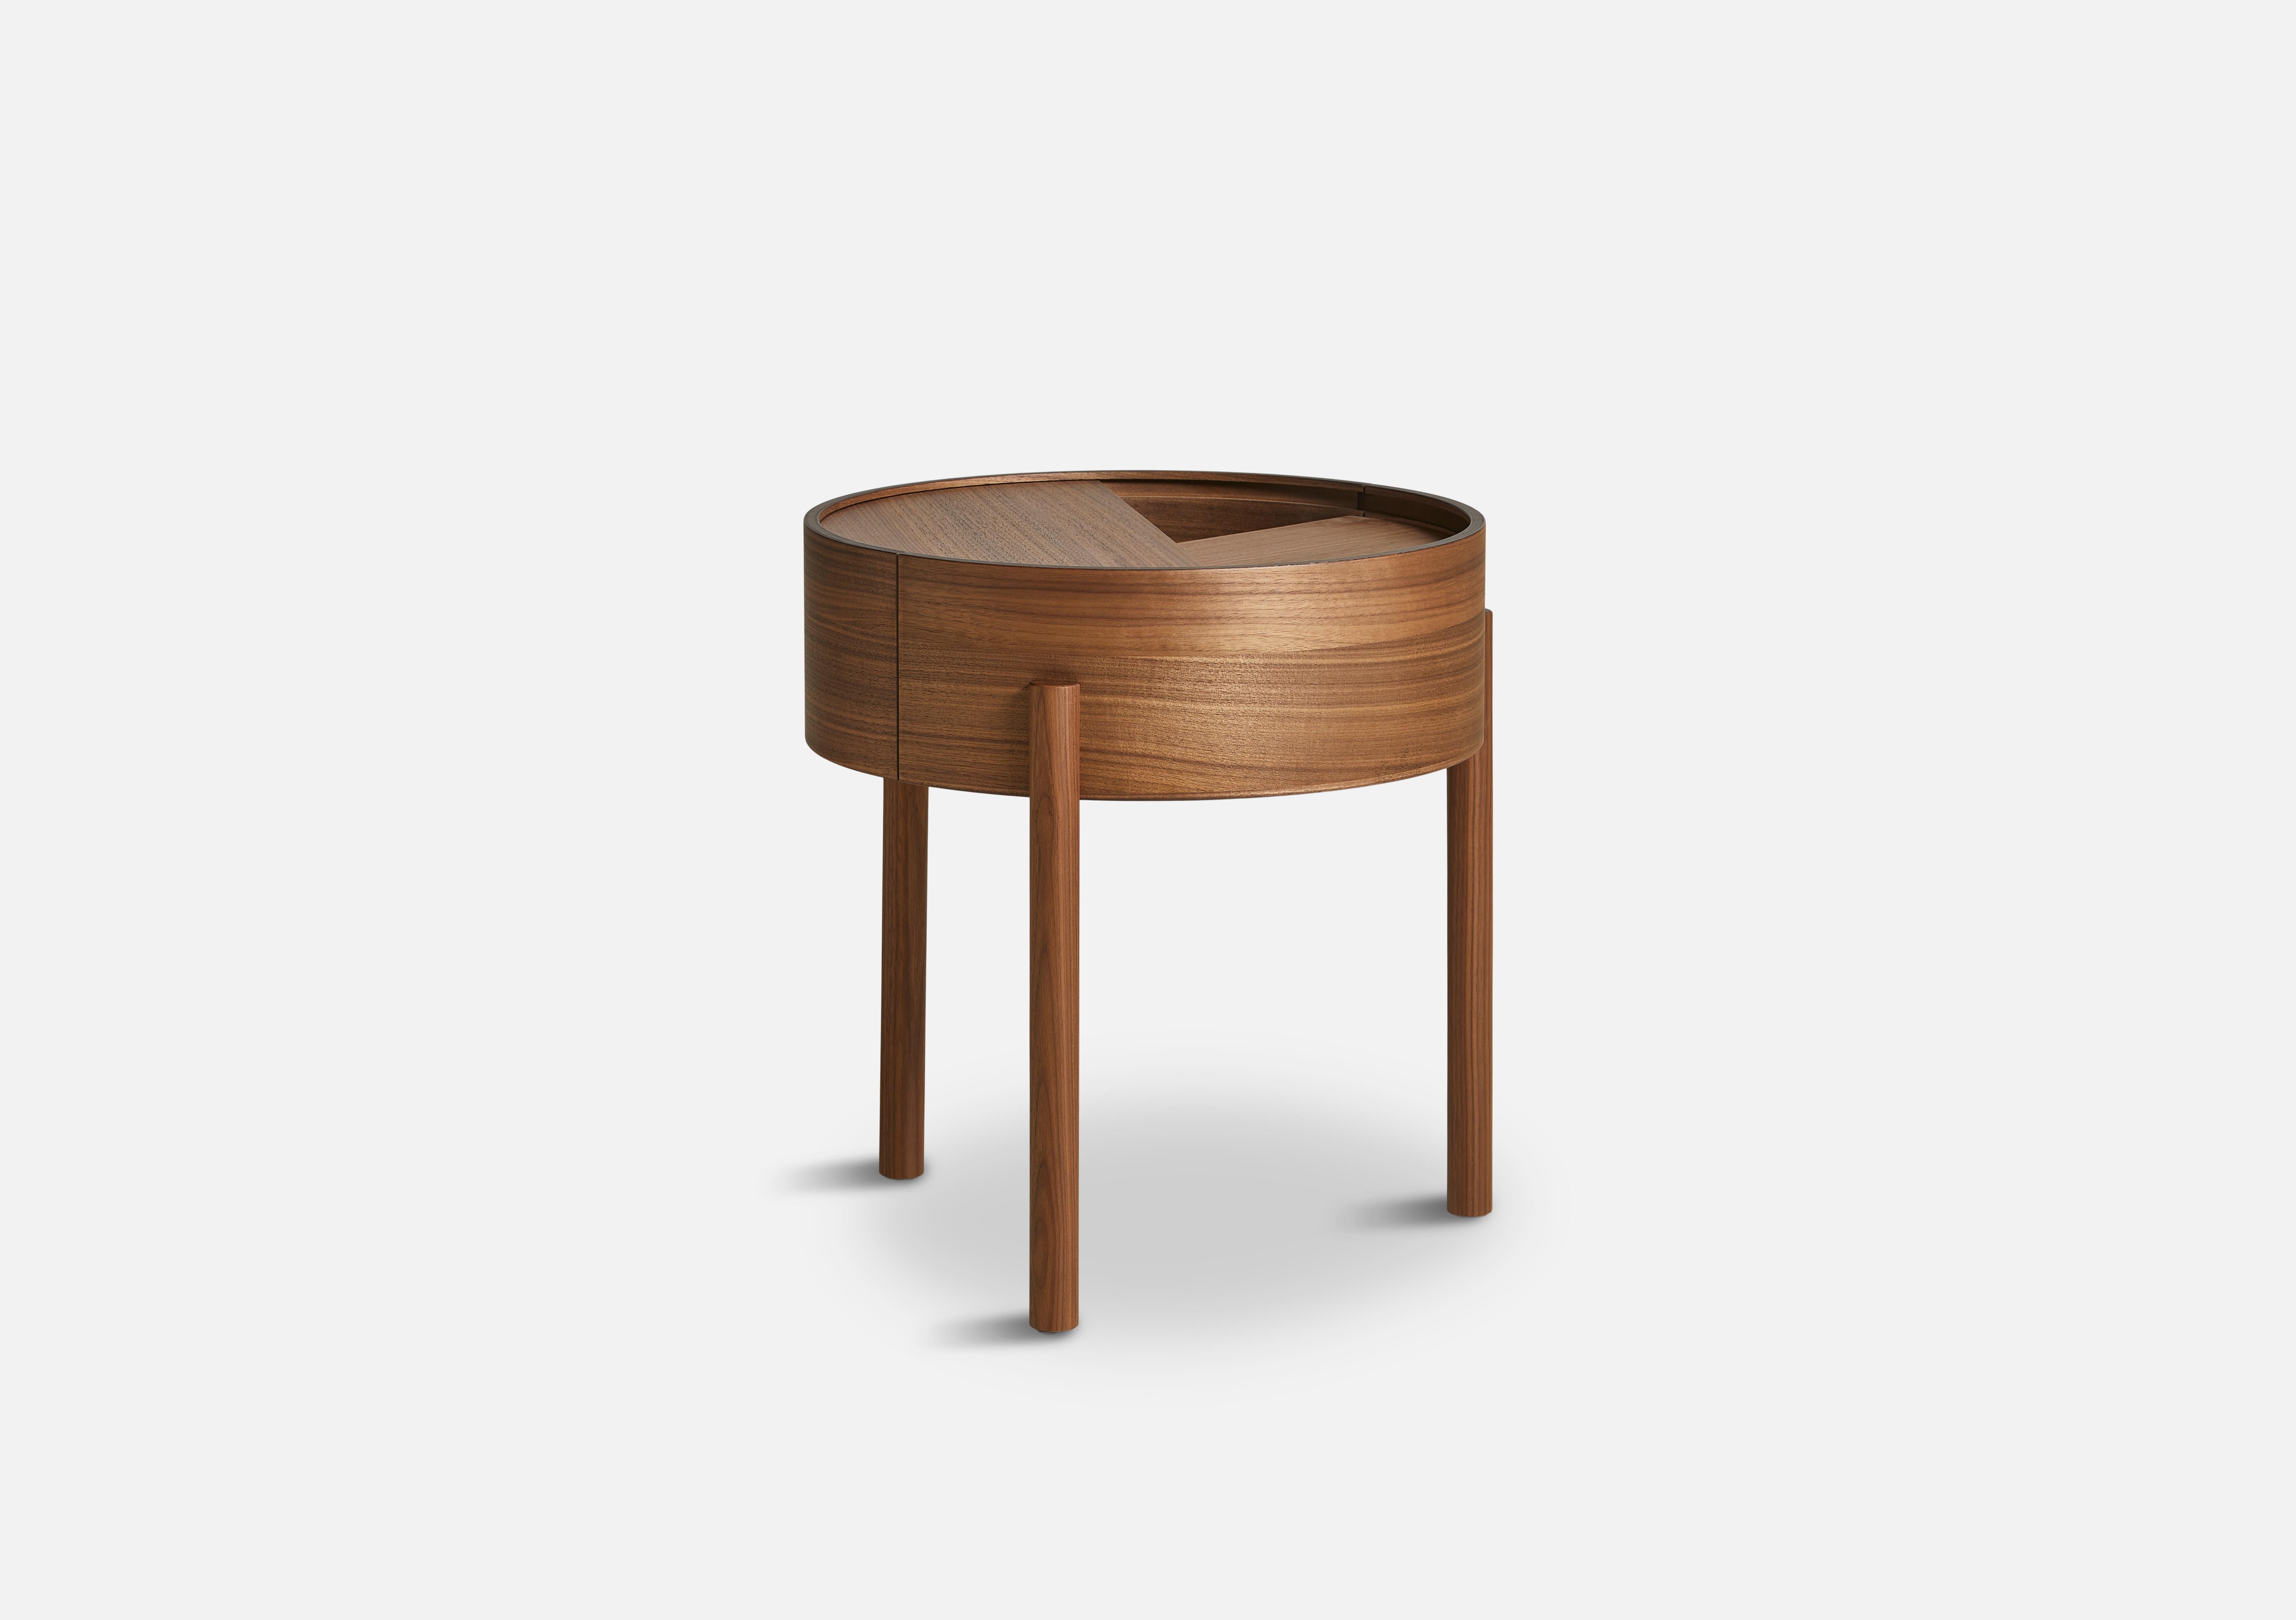 Walnut Arc side table by Ditte Vad and Julie Bertrup.
Materials: Walnut, Nano Laminate.
Dimensions: D 42 x W 42 x H 45 cm.

The founders, Mia and Torben Koed, decided to put their 30 years of experience into a new project. It was time for a